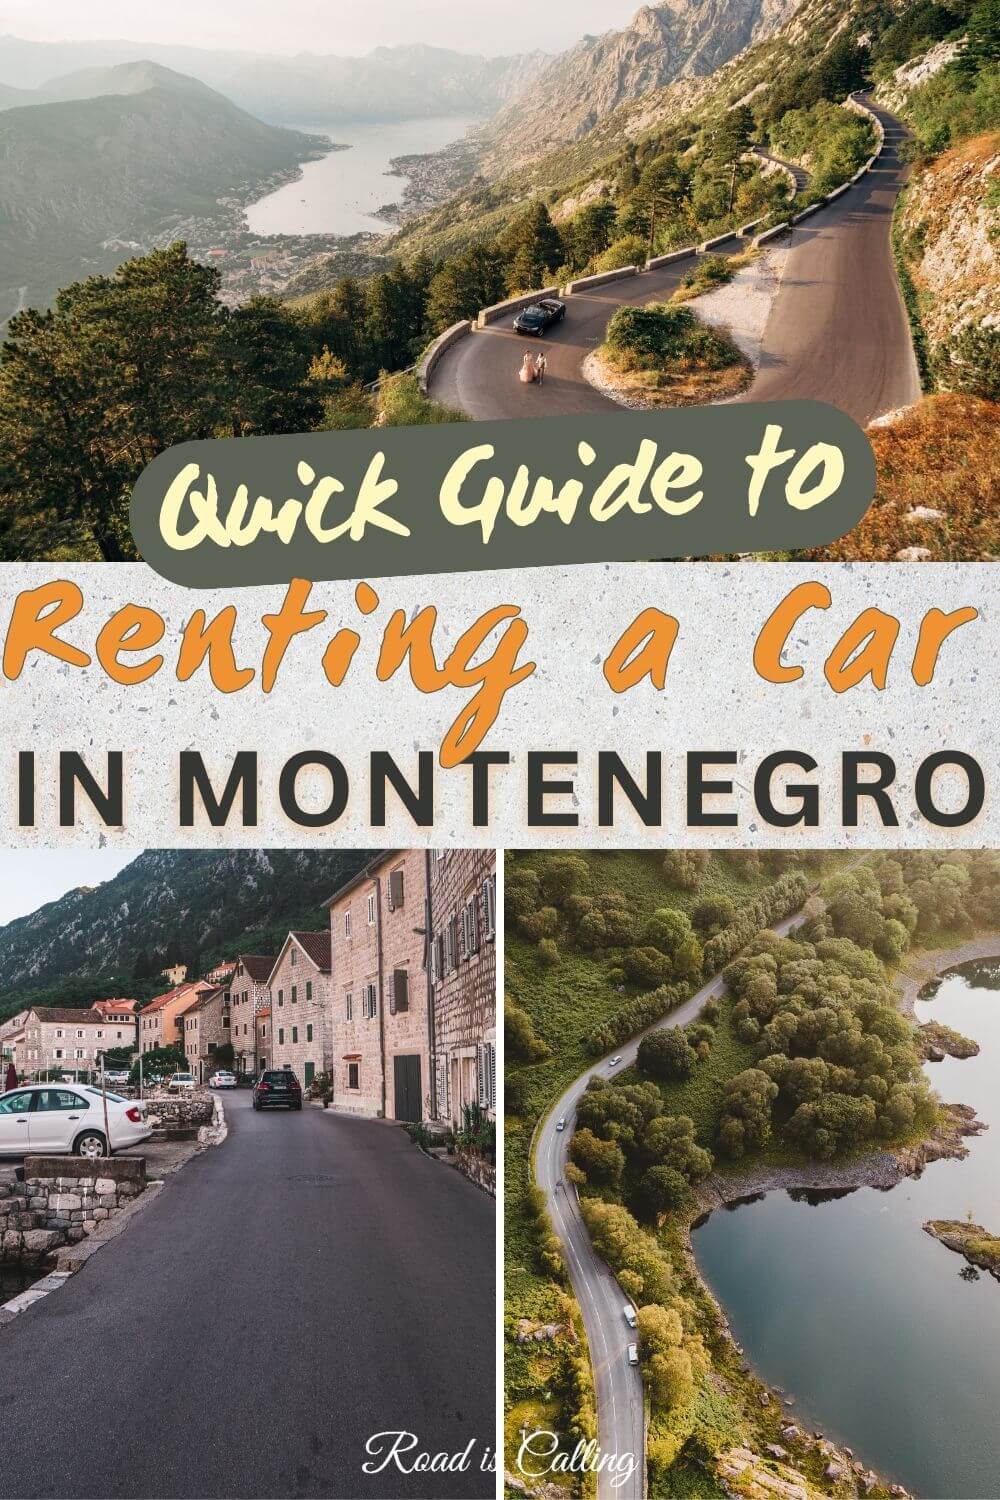 Renting a car in Montenegro